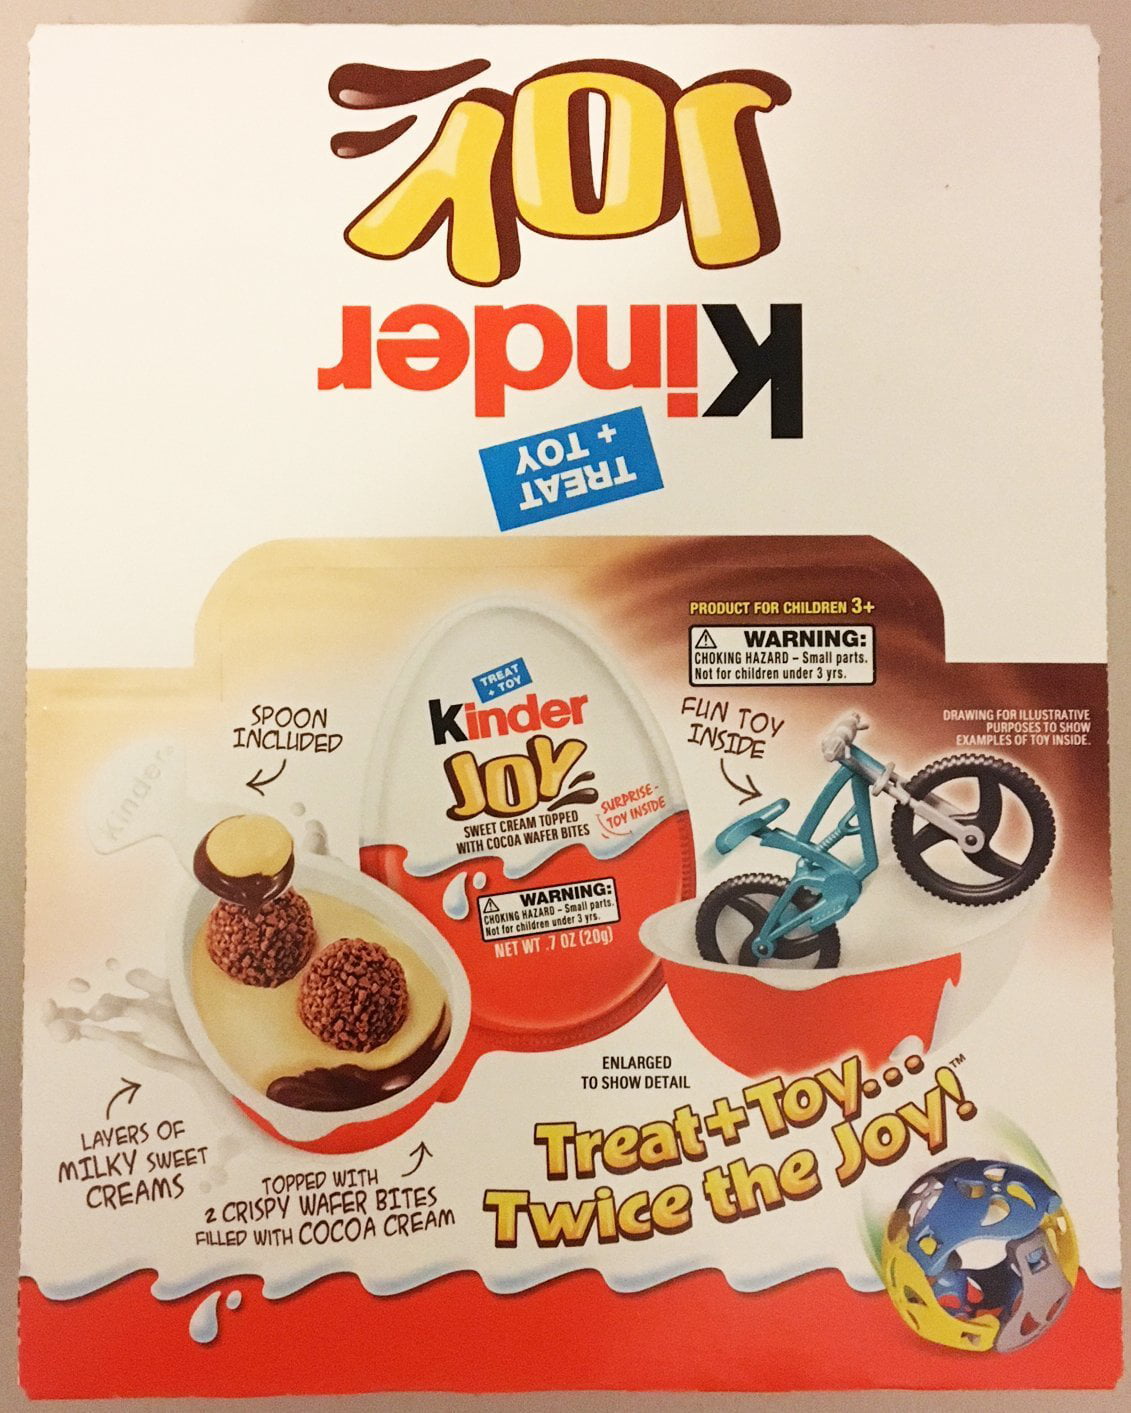 Kinder Joy with Surprise Eggs in Toy & Chocolate  1 x Eggs BUY 3 GET 2 FREE 